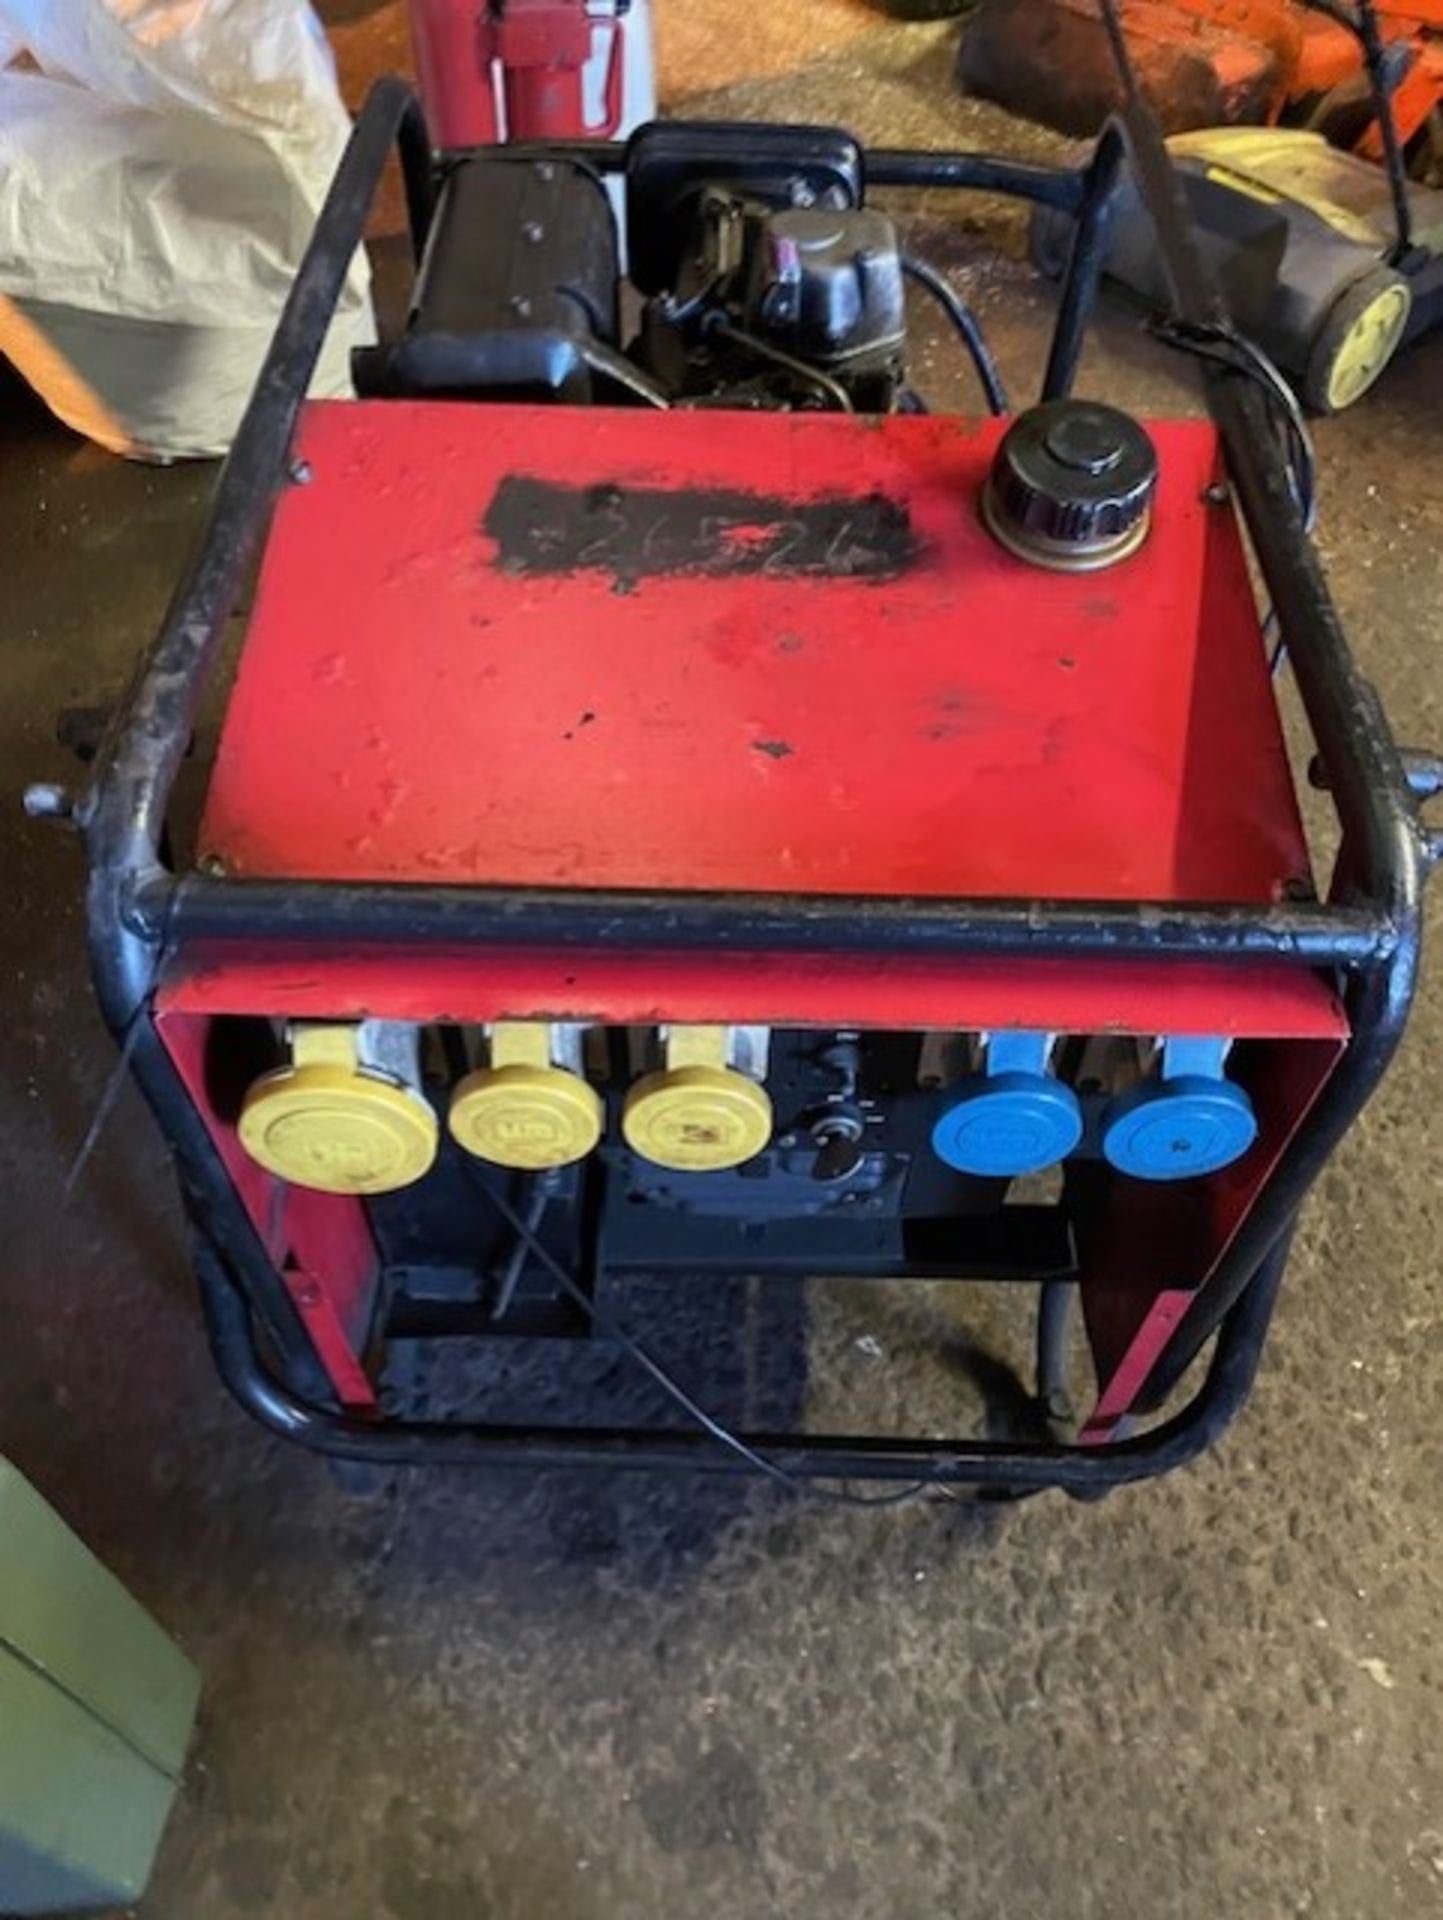 Generator with yanmar diesel engine won’t start so sold as not working - Image 2 of 5